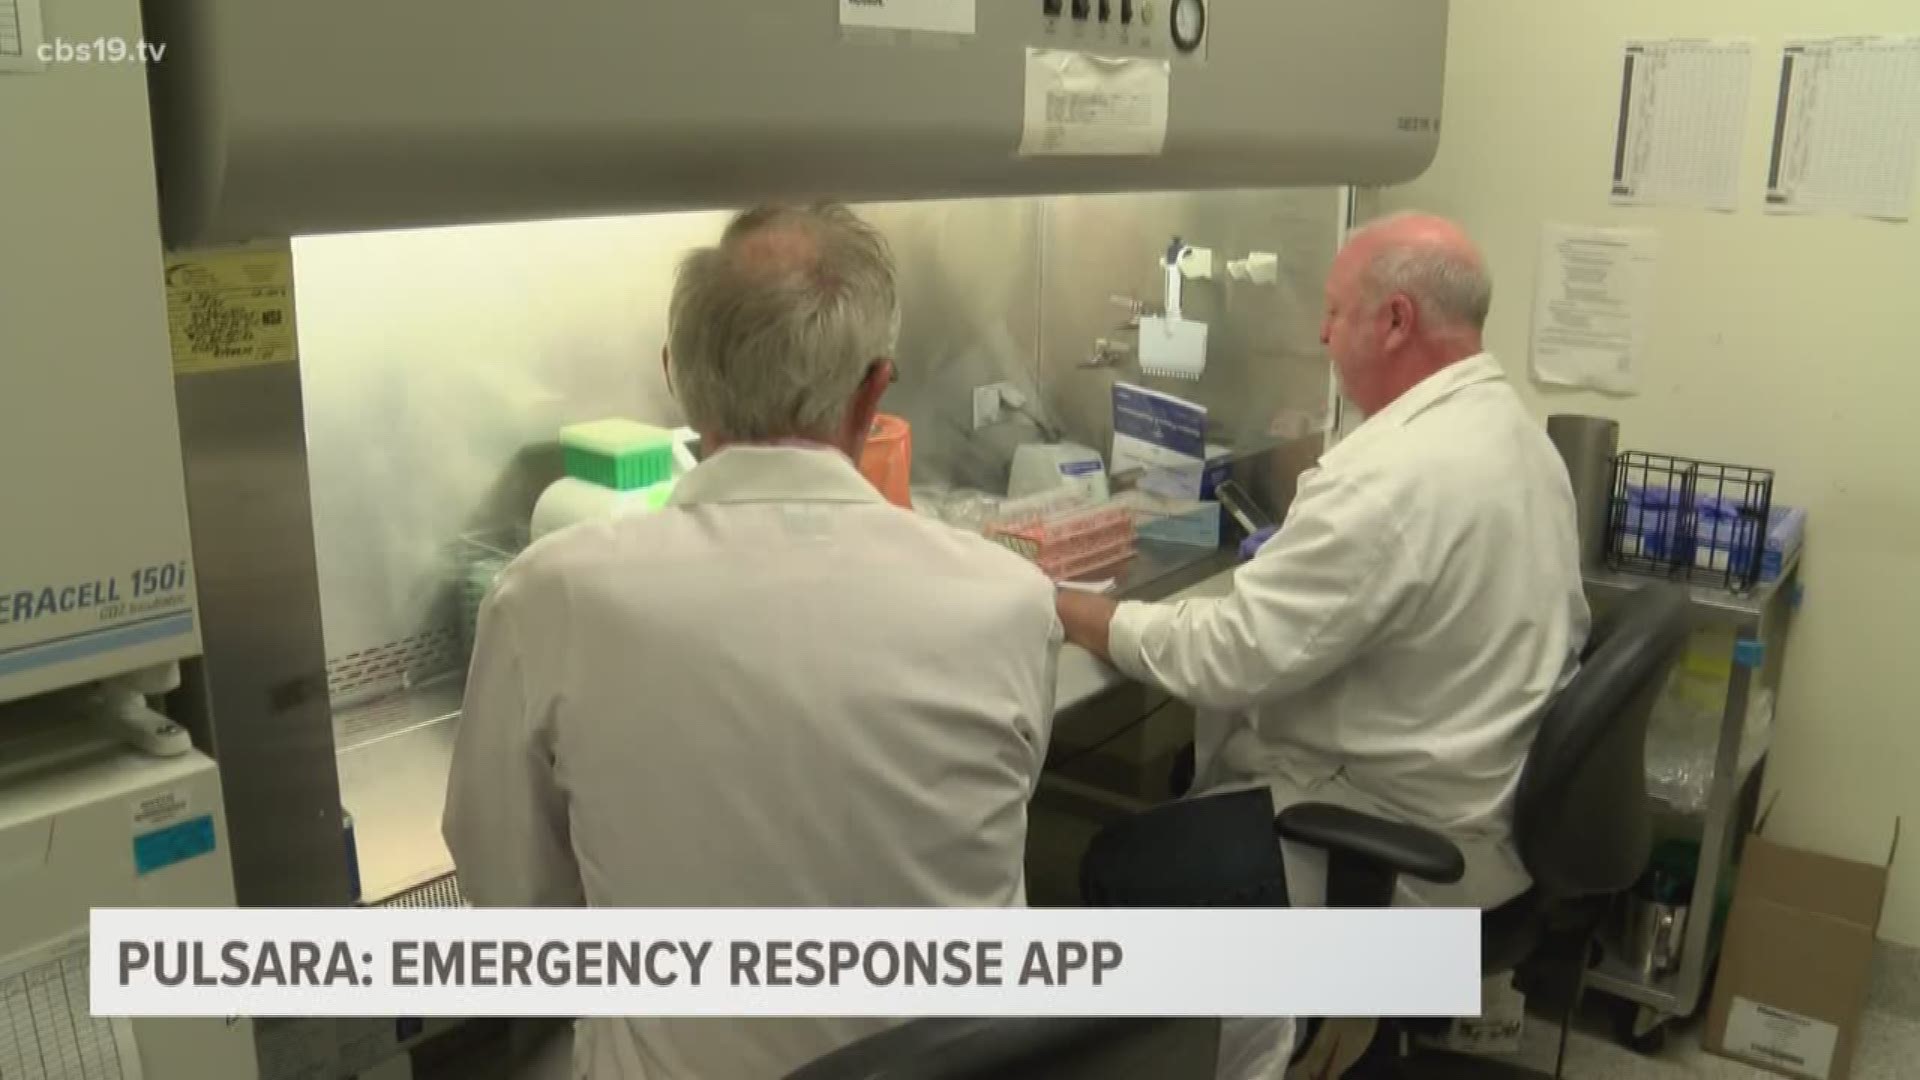 A smartphone app is allowing first responders to share patient information quicker in order to save lives. 